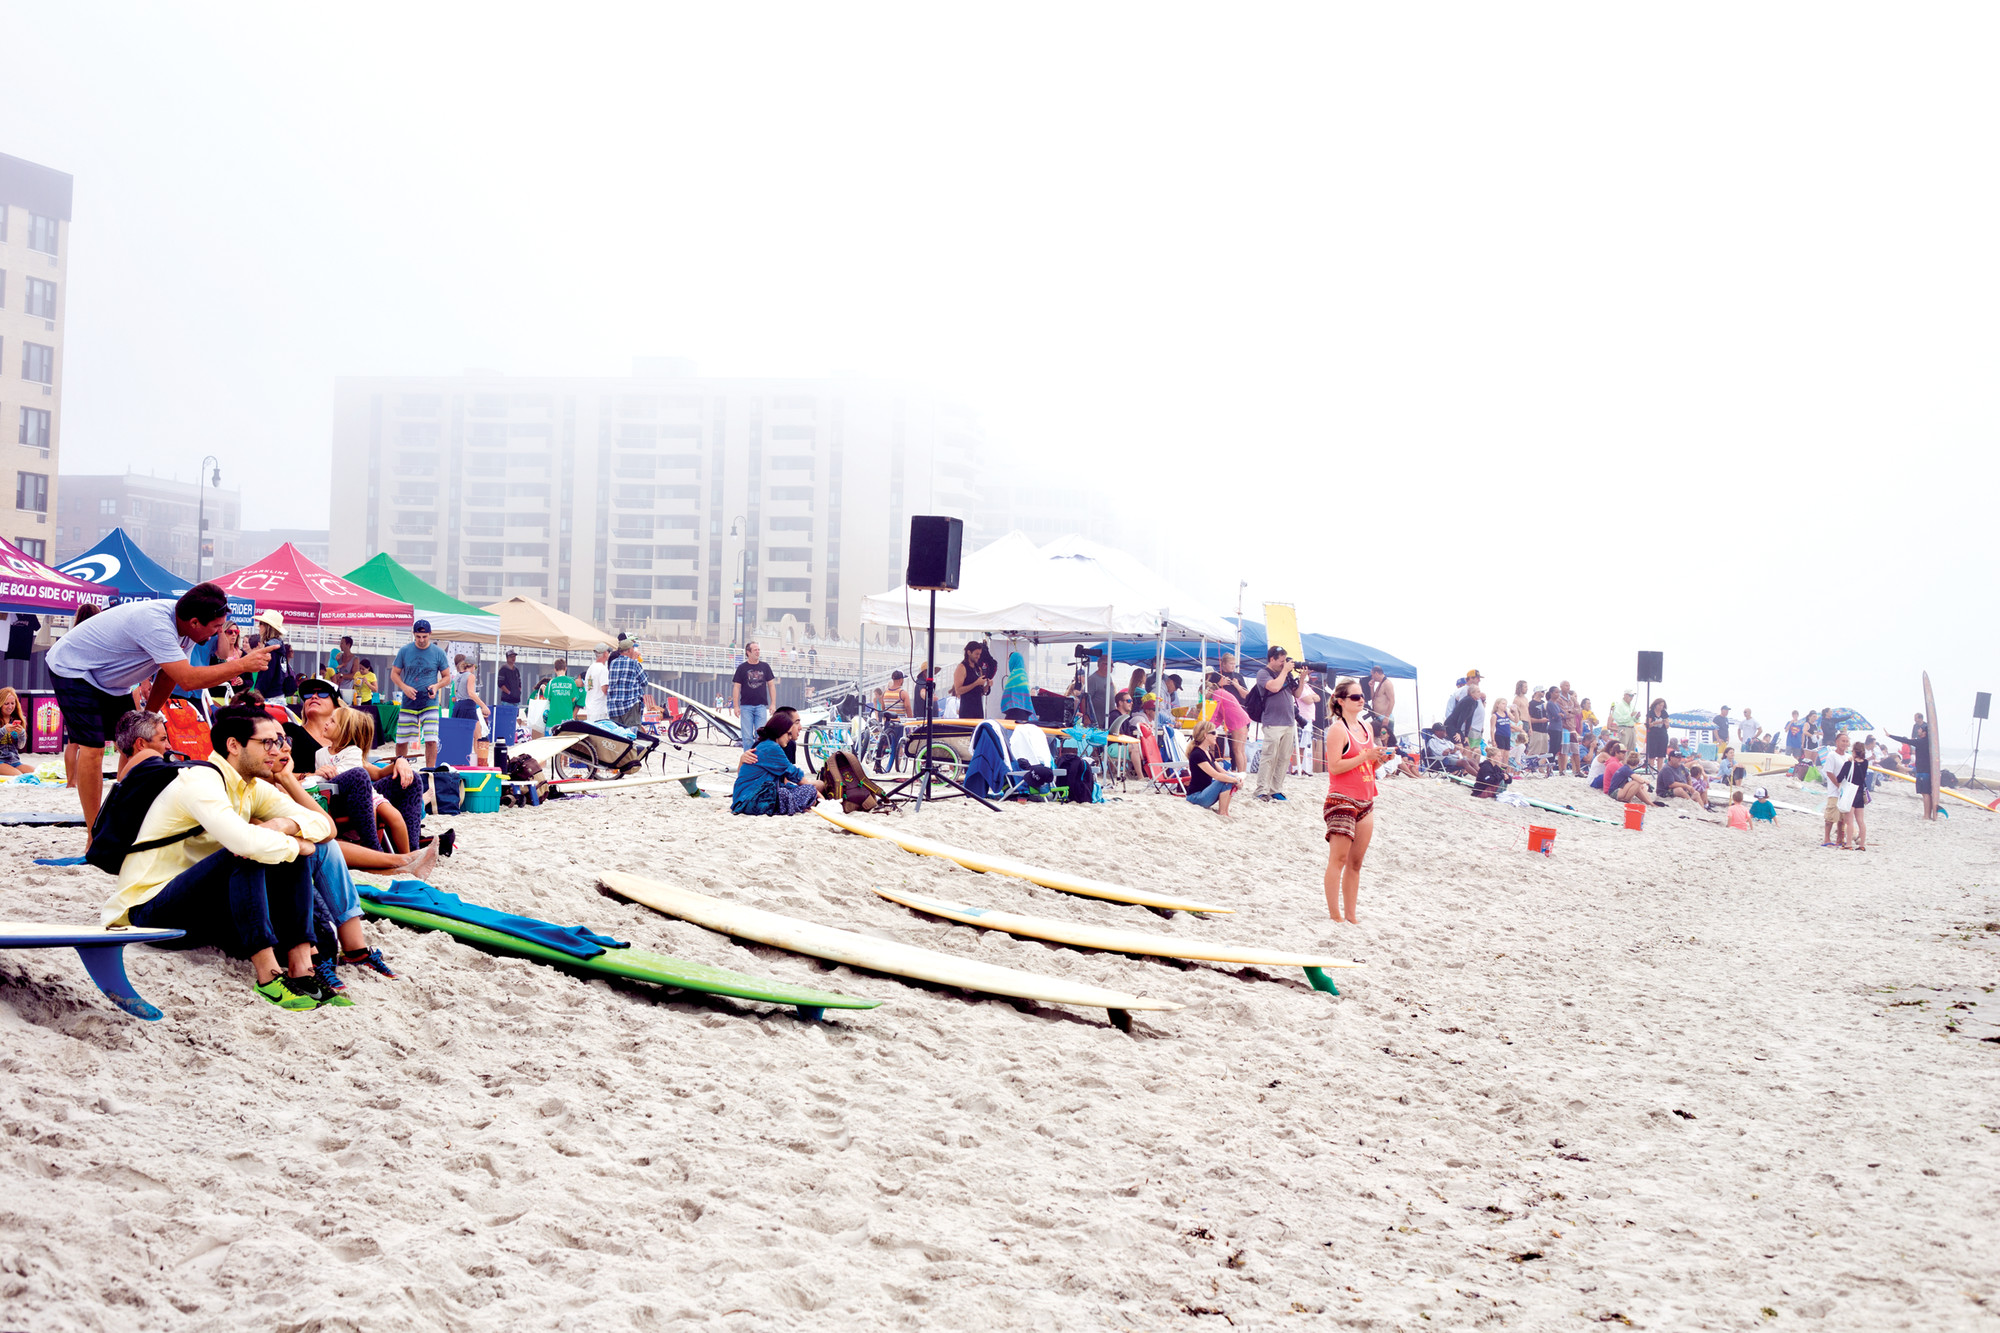 Eric Dunetz/HeraldThe crowd gathered at Long Beach Boulevard beach to watch longboarders compete last Saturday.